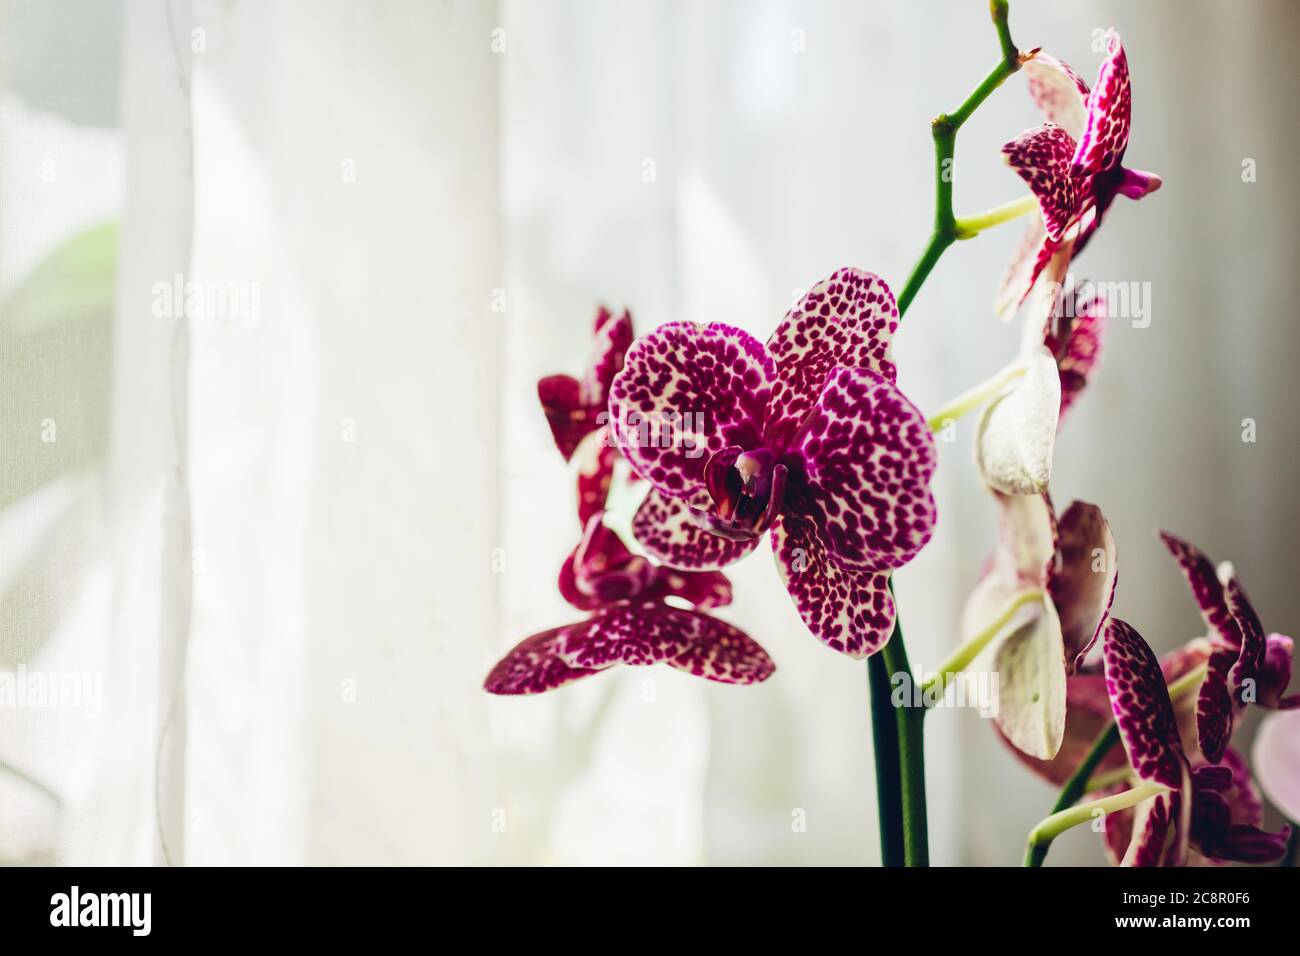 Wild cat orchid phalaenopsis. Home plants care. Close-up of violet flowers with dots ornament Stock Photo